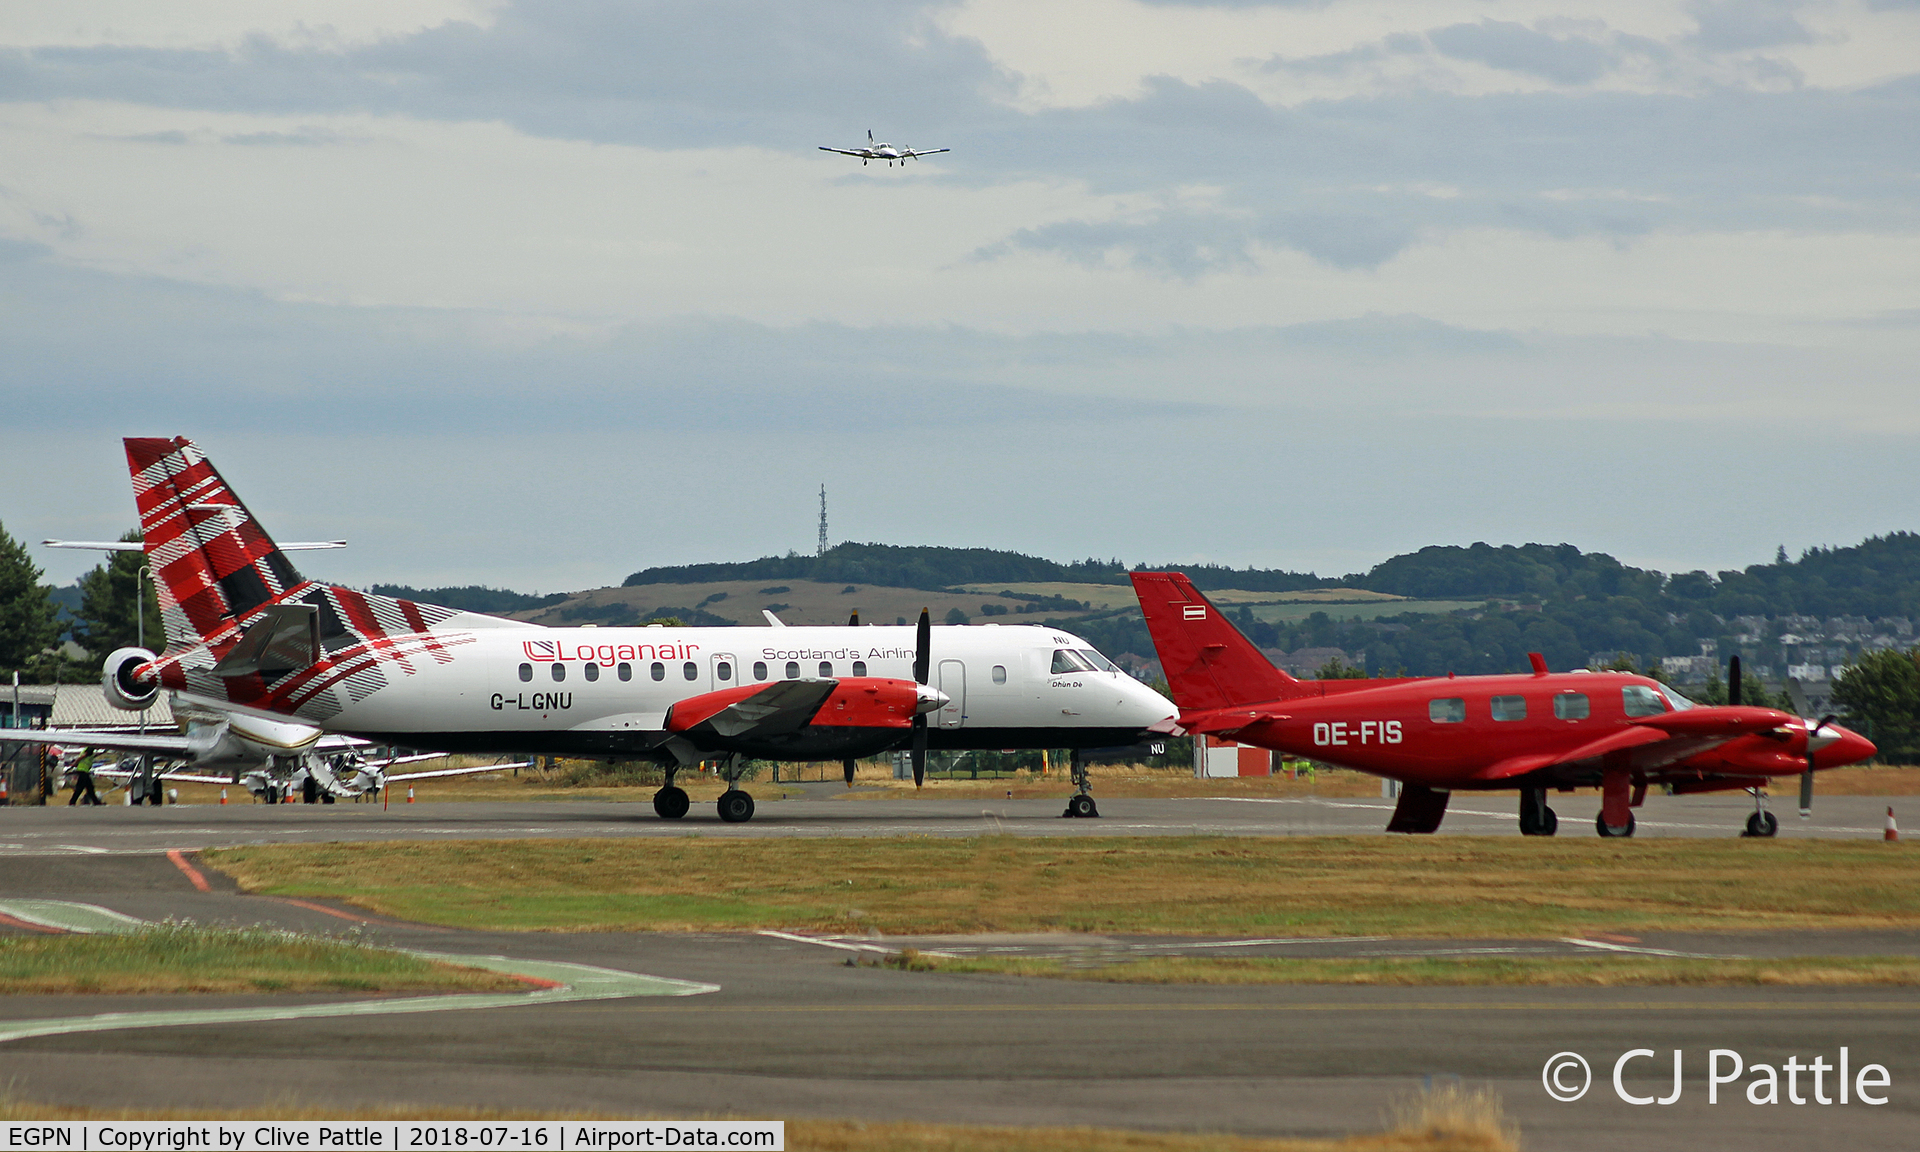 Dundee Airport, Dundee, Scotland United Kingdom (EGPN) - Dundee - Apron view. Loganair Saab 340 G-LGNU and visiting PA31 OE-FIS and Legacy G-HUBY share the space. In the distance based PA34 G-CAHA is on finals to land.